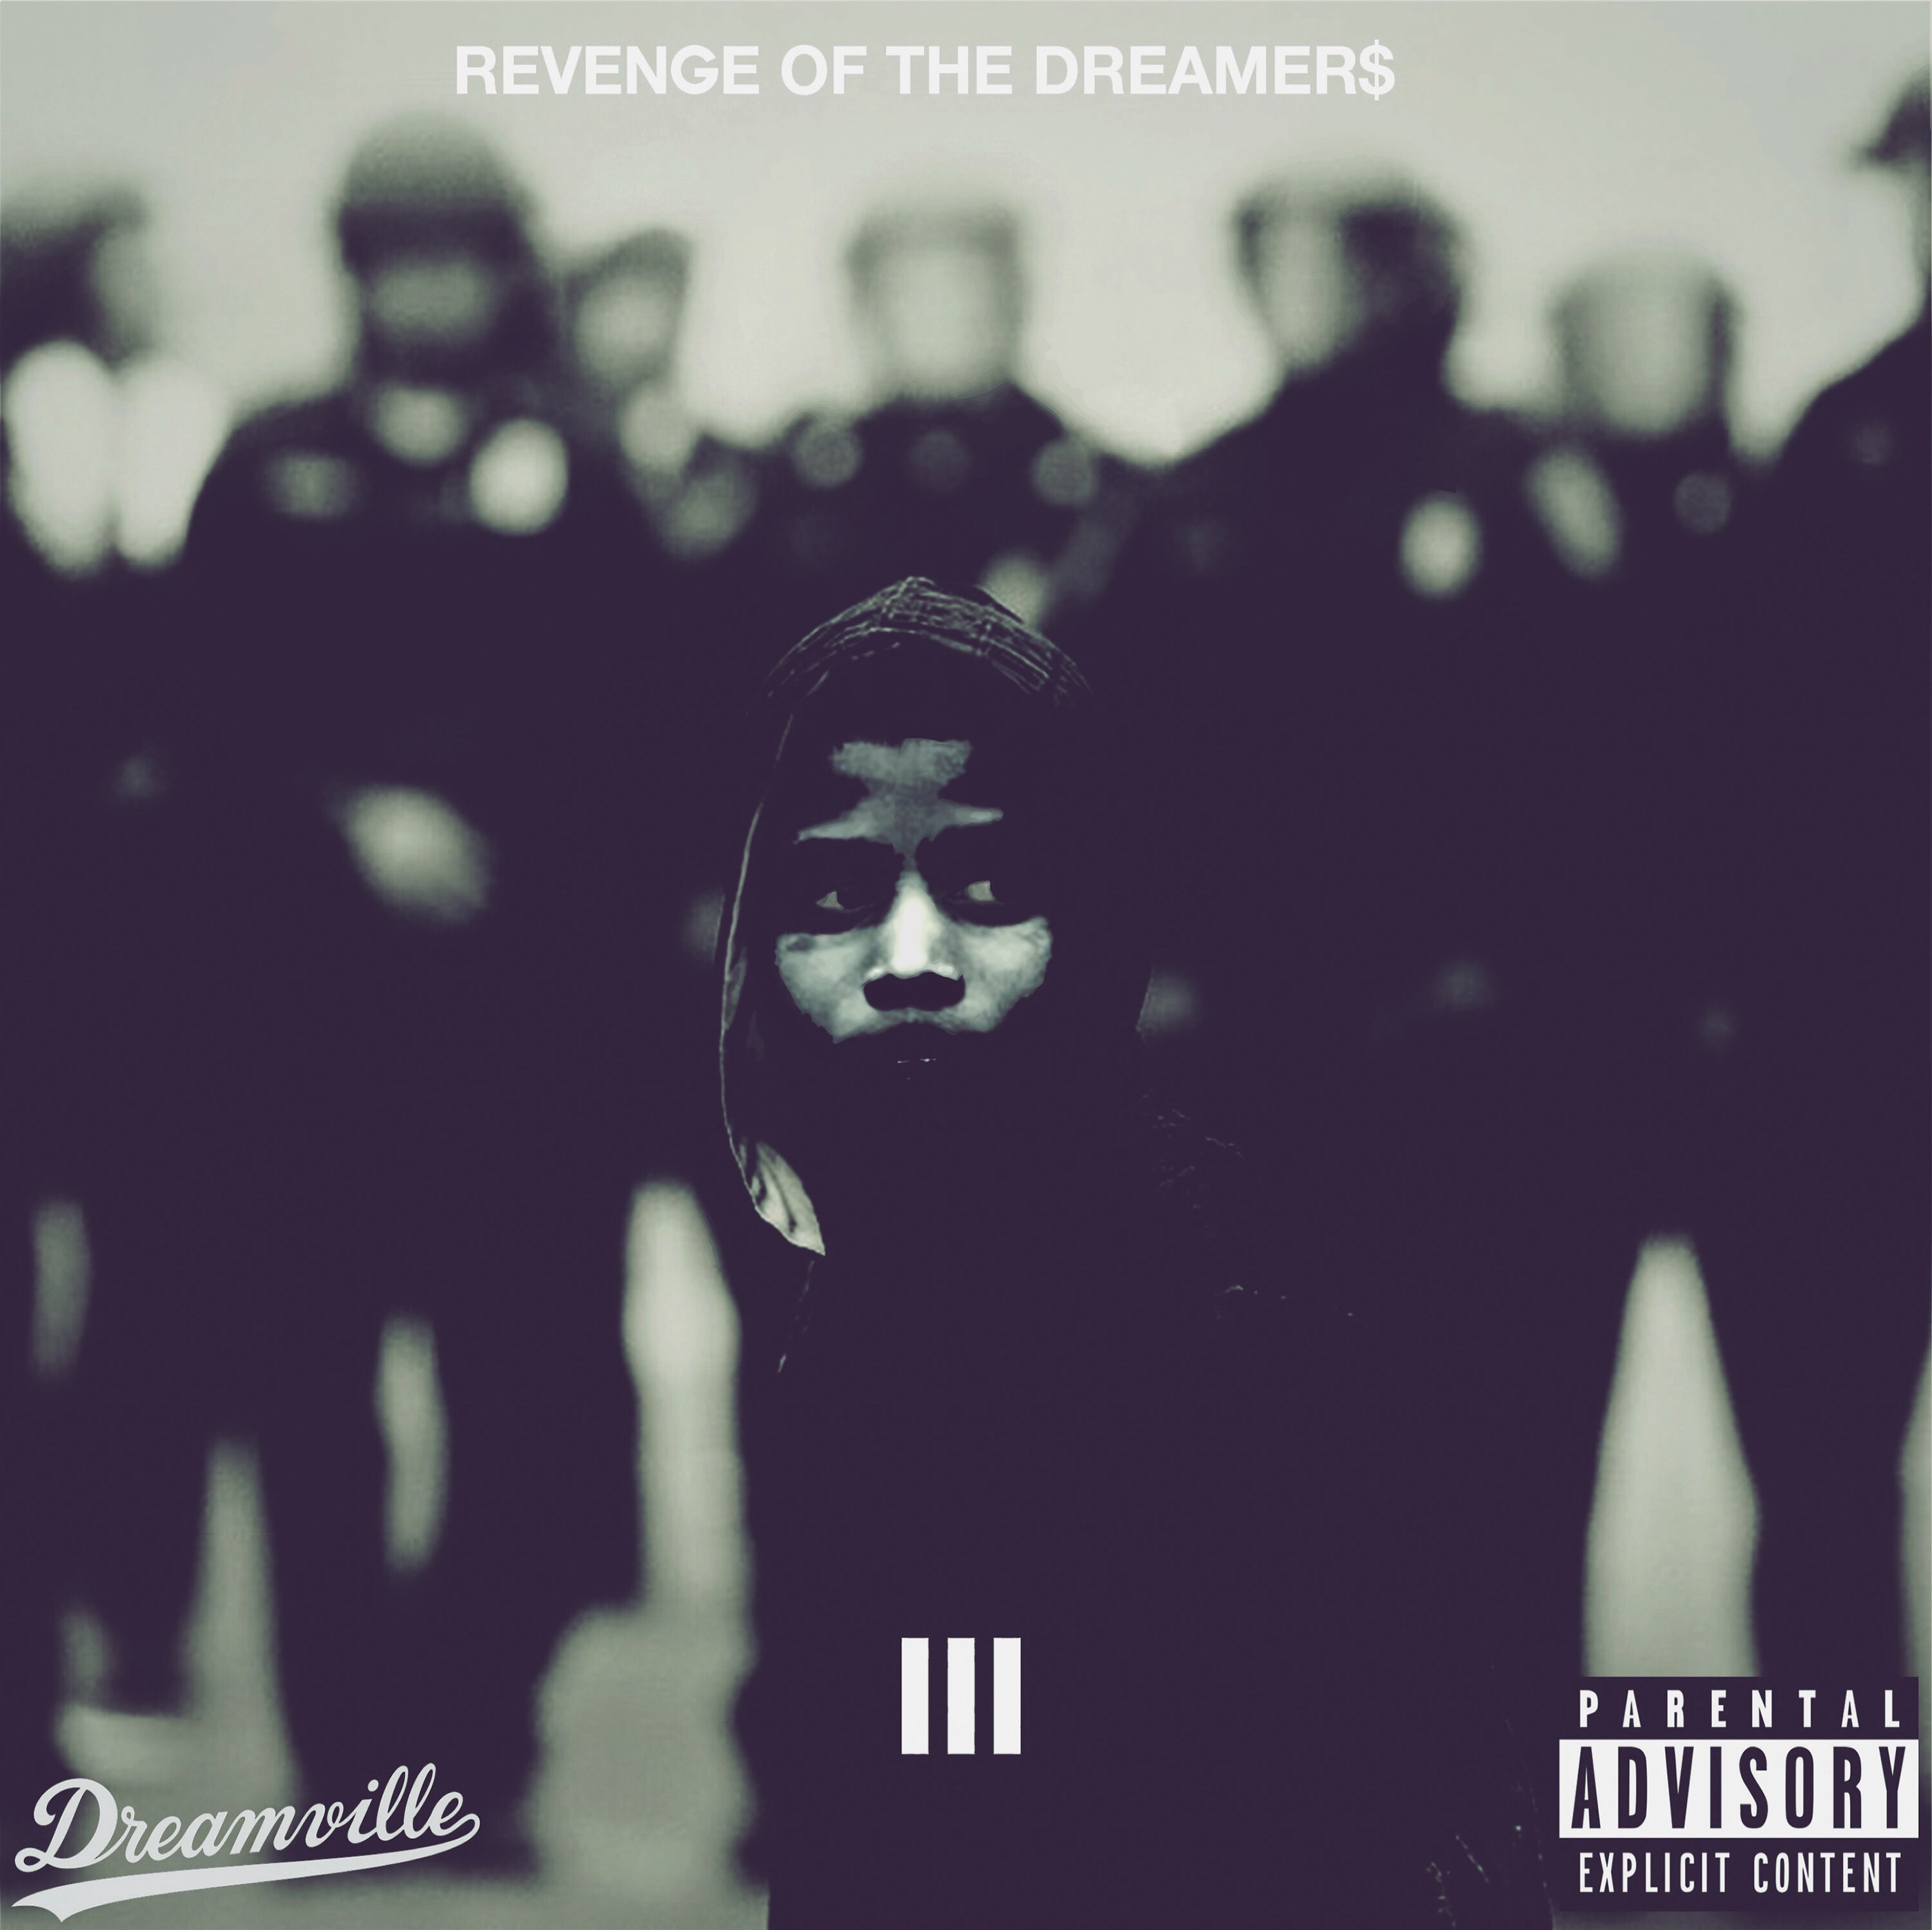 Dreamville - Revenge of The Dreamers III Concept Covers on Behance